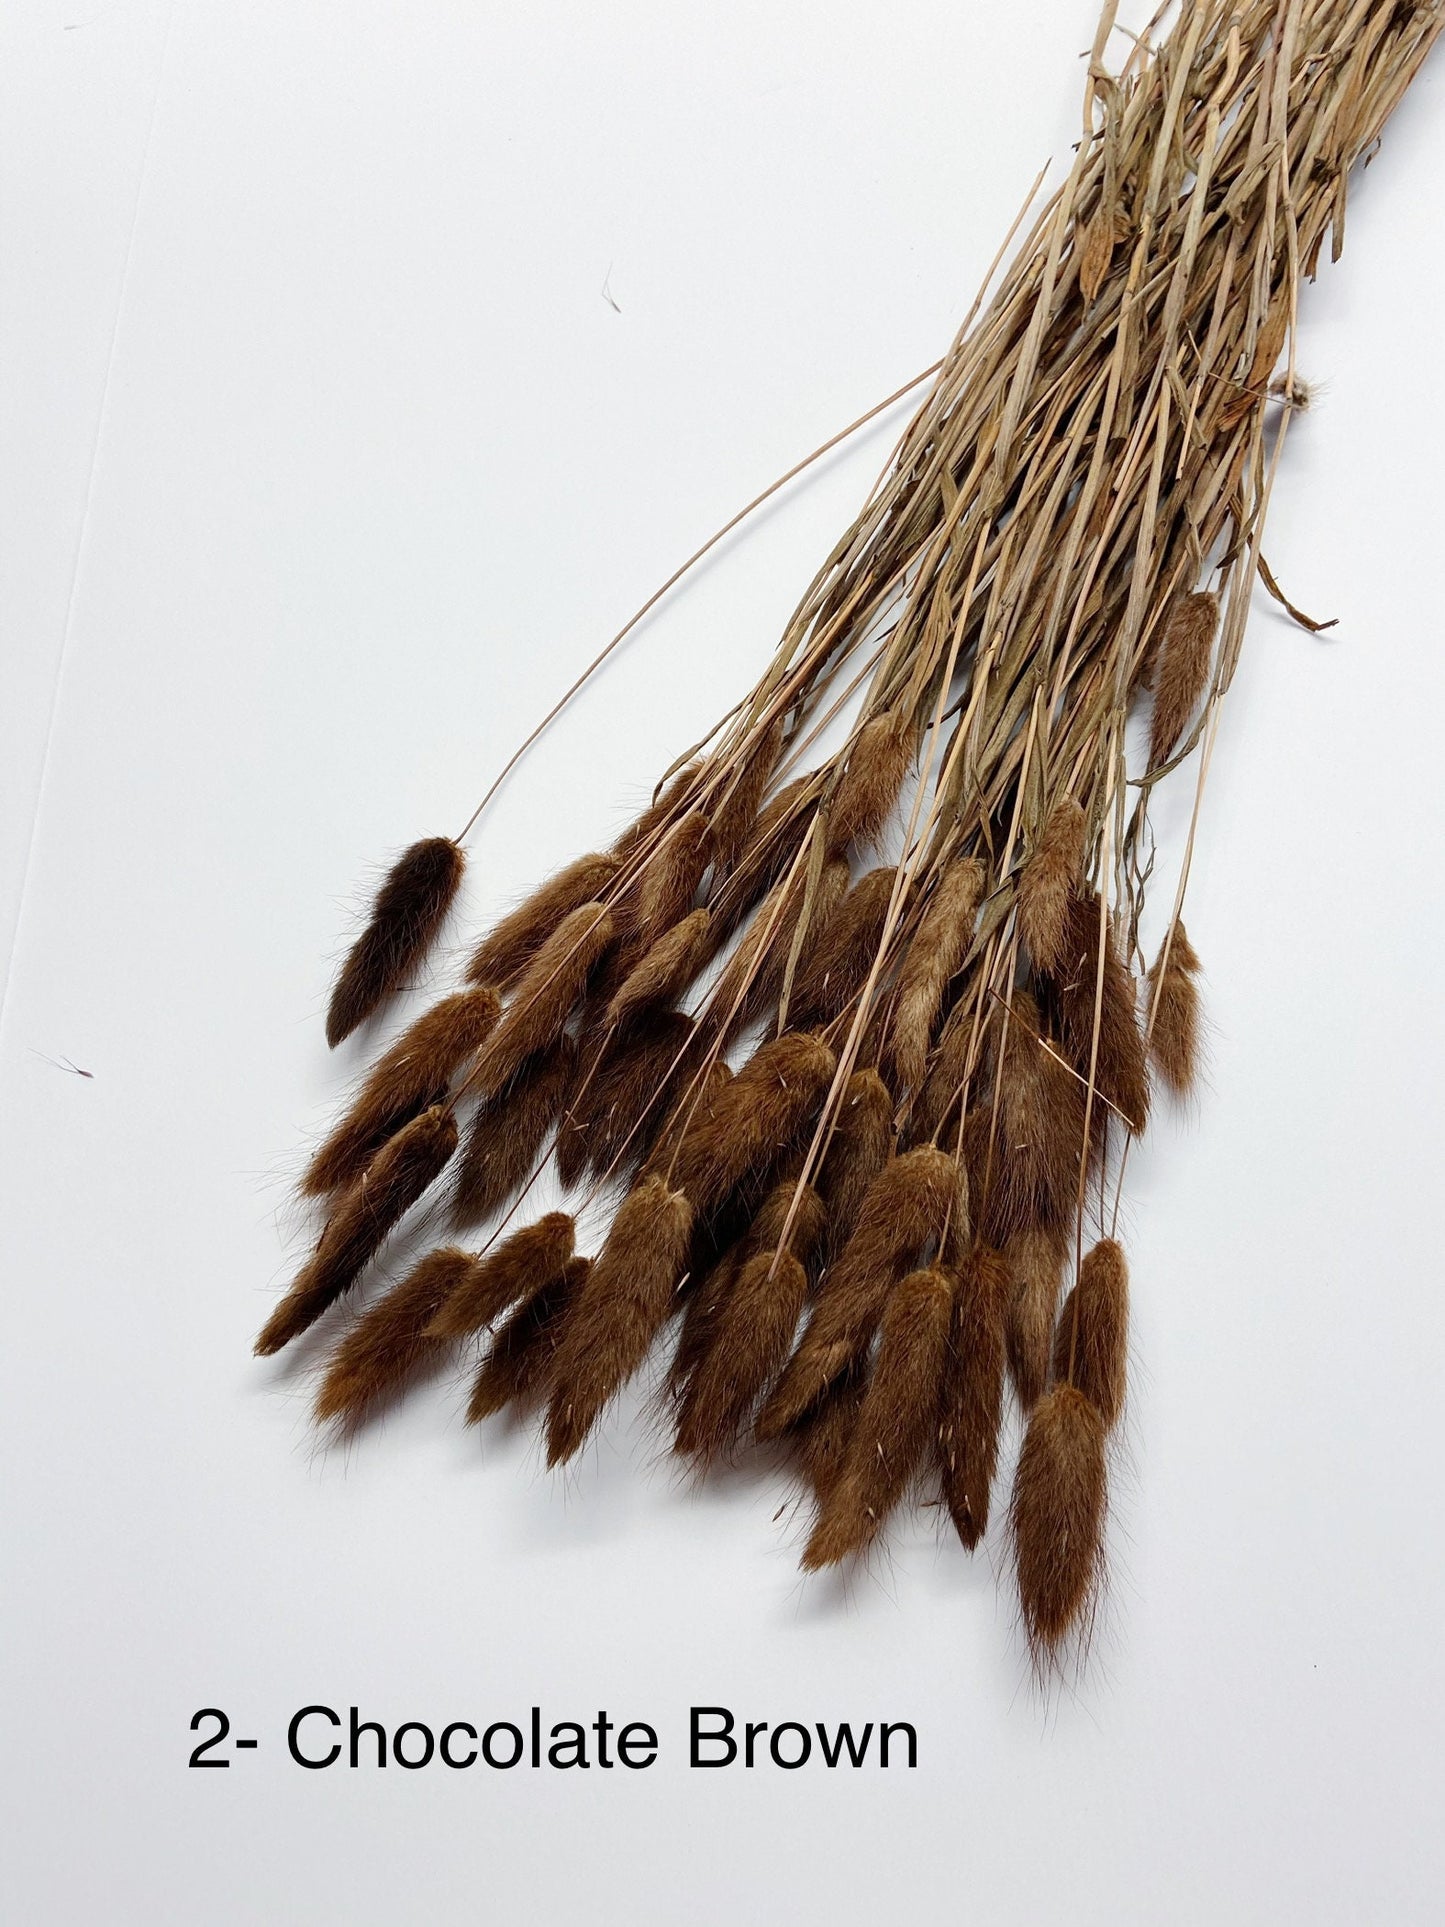 Bunny Tails, Preserved Flowers, real flowers, dried flowers, soft flowers, fluffy, pink, chocolate brown, bleached white, natural,